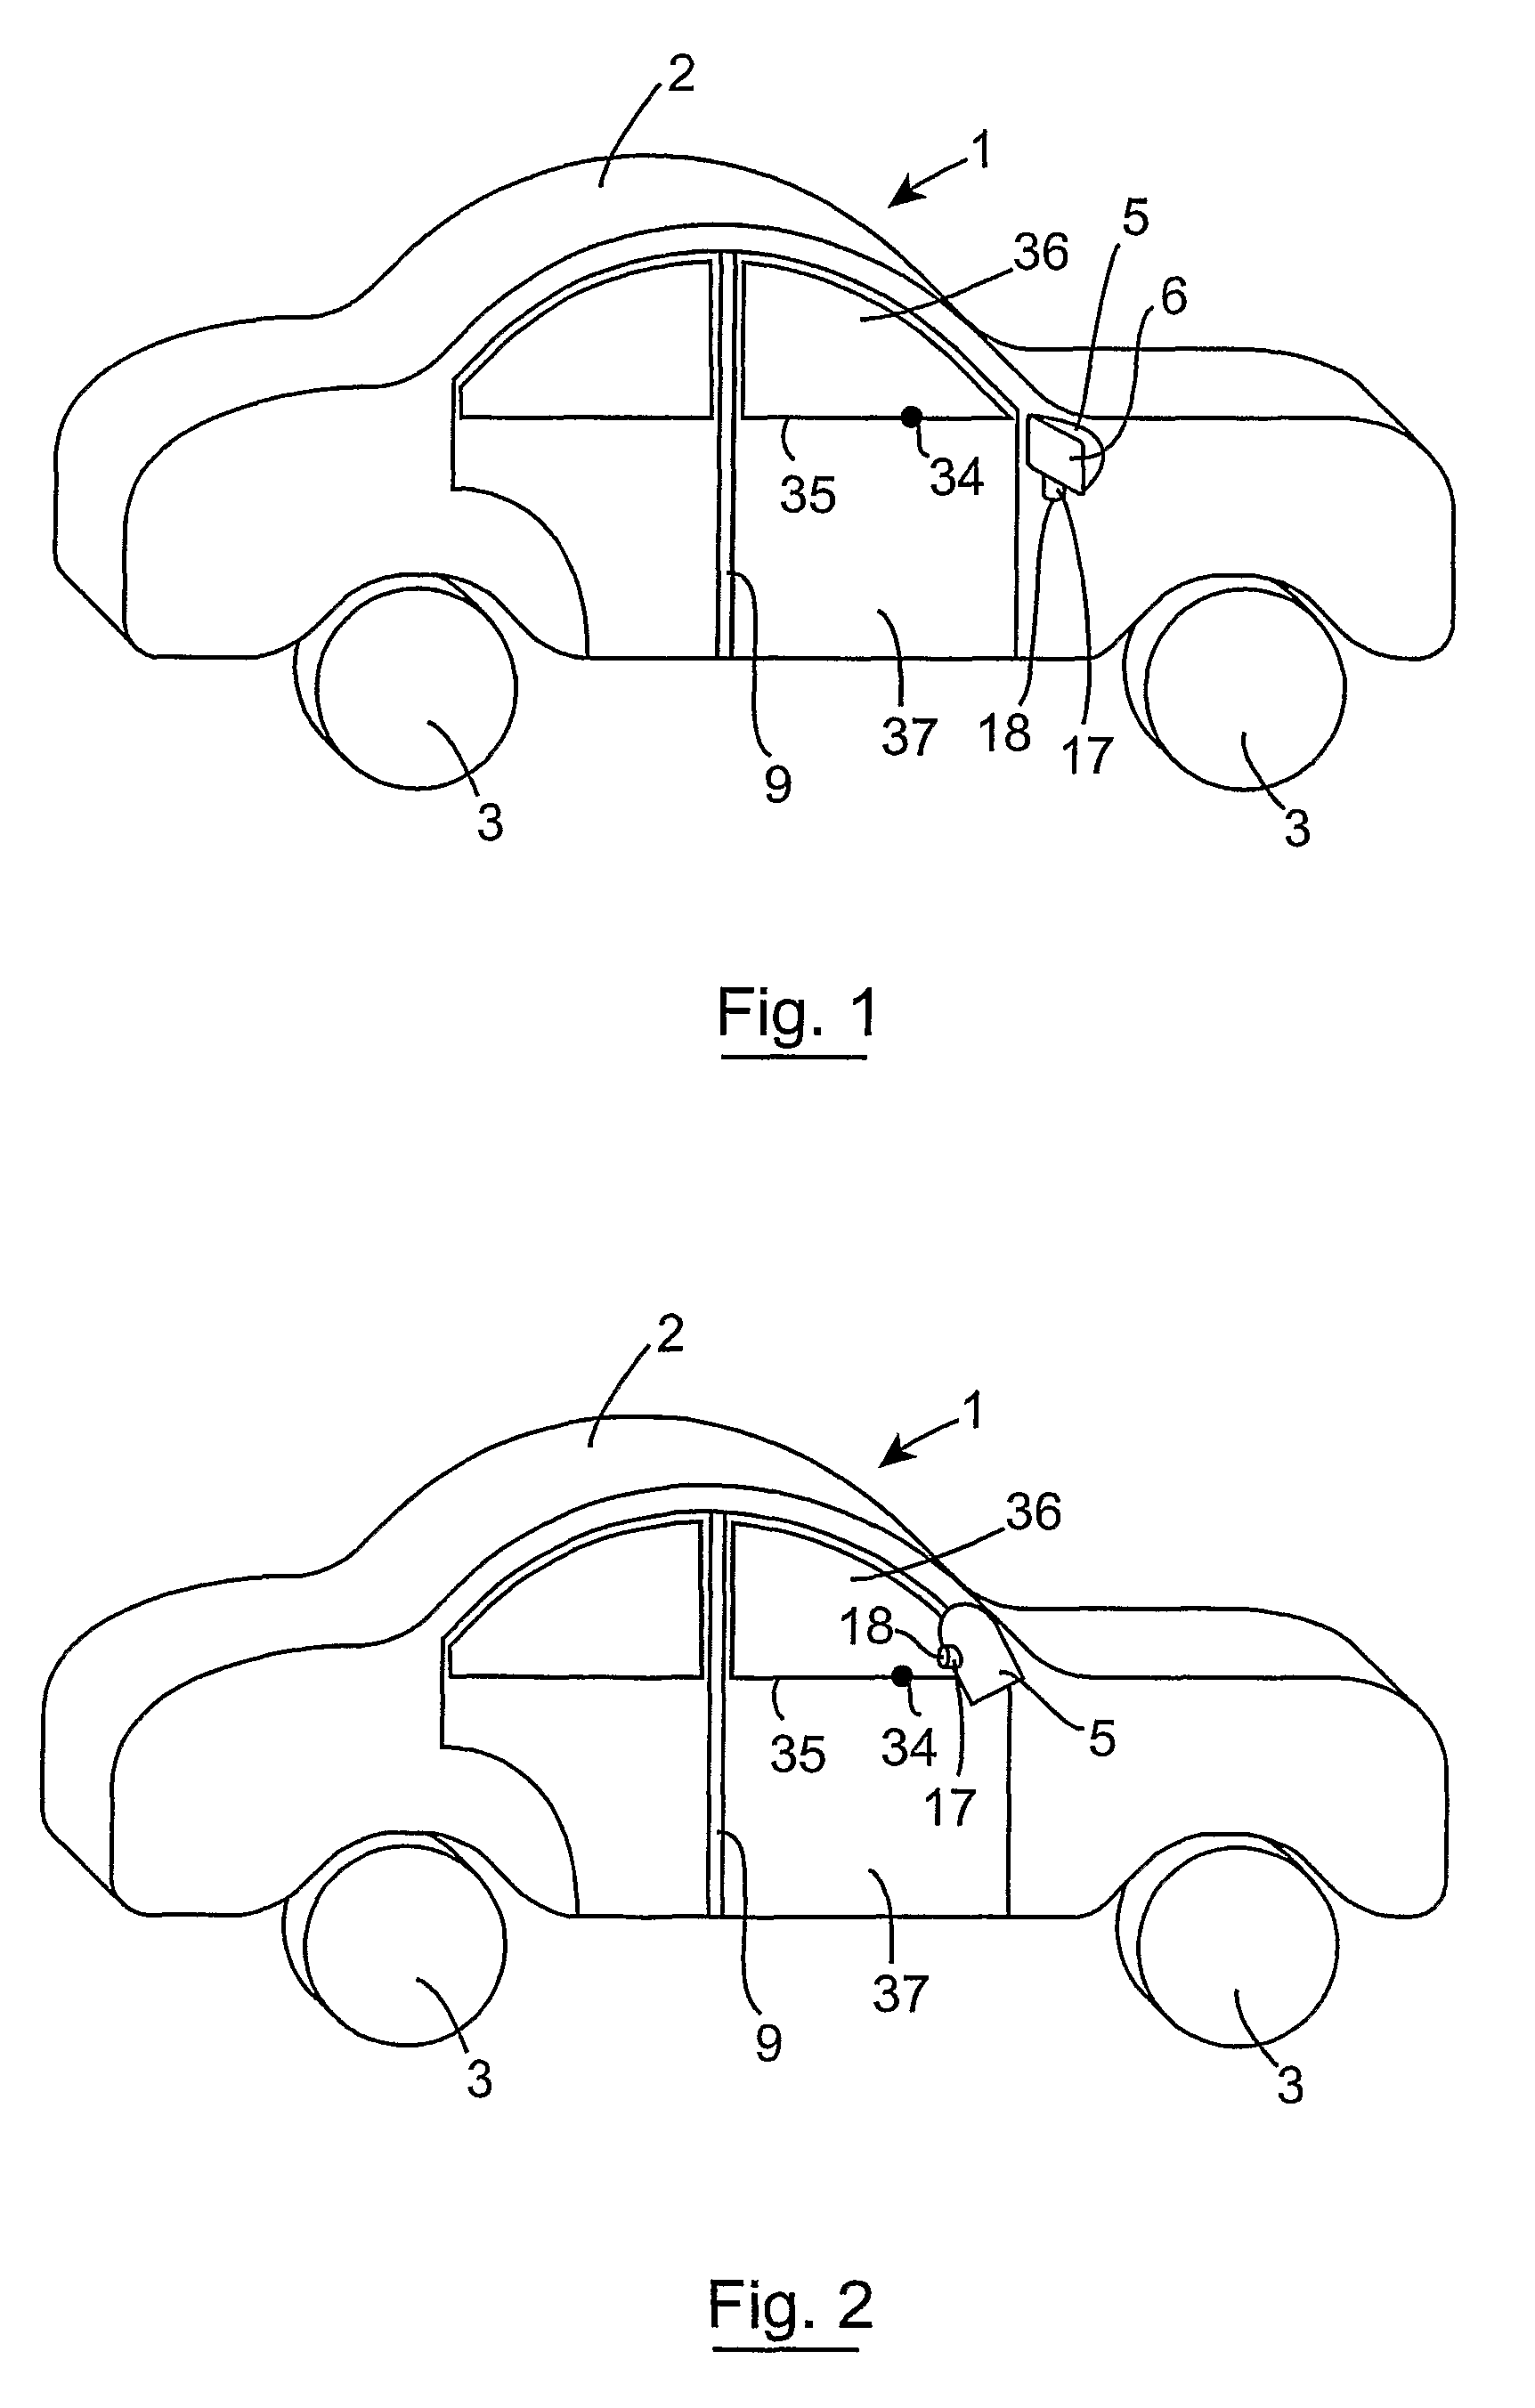 Method and apparatus for calibrating an image capturing device, and a method and apparatus for outputting image frames from sequentially captured image frames with compensation for image capture device offset